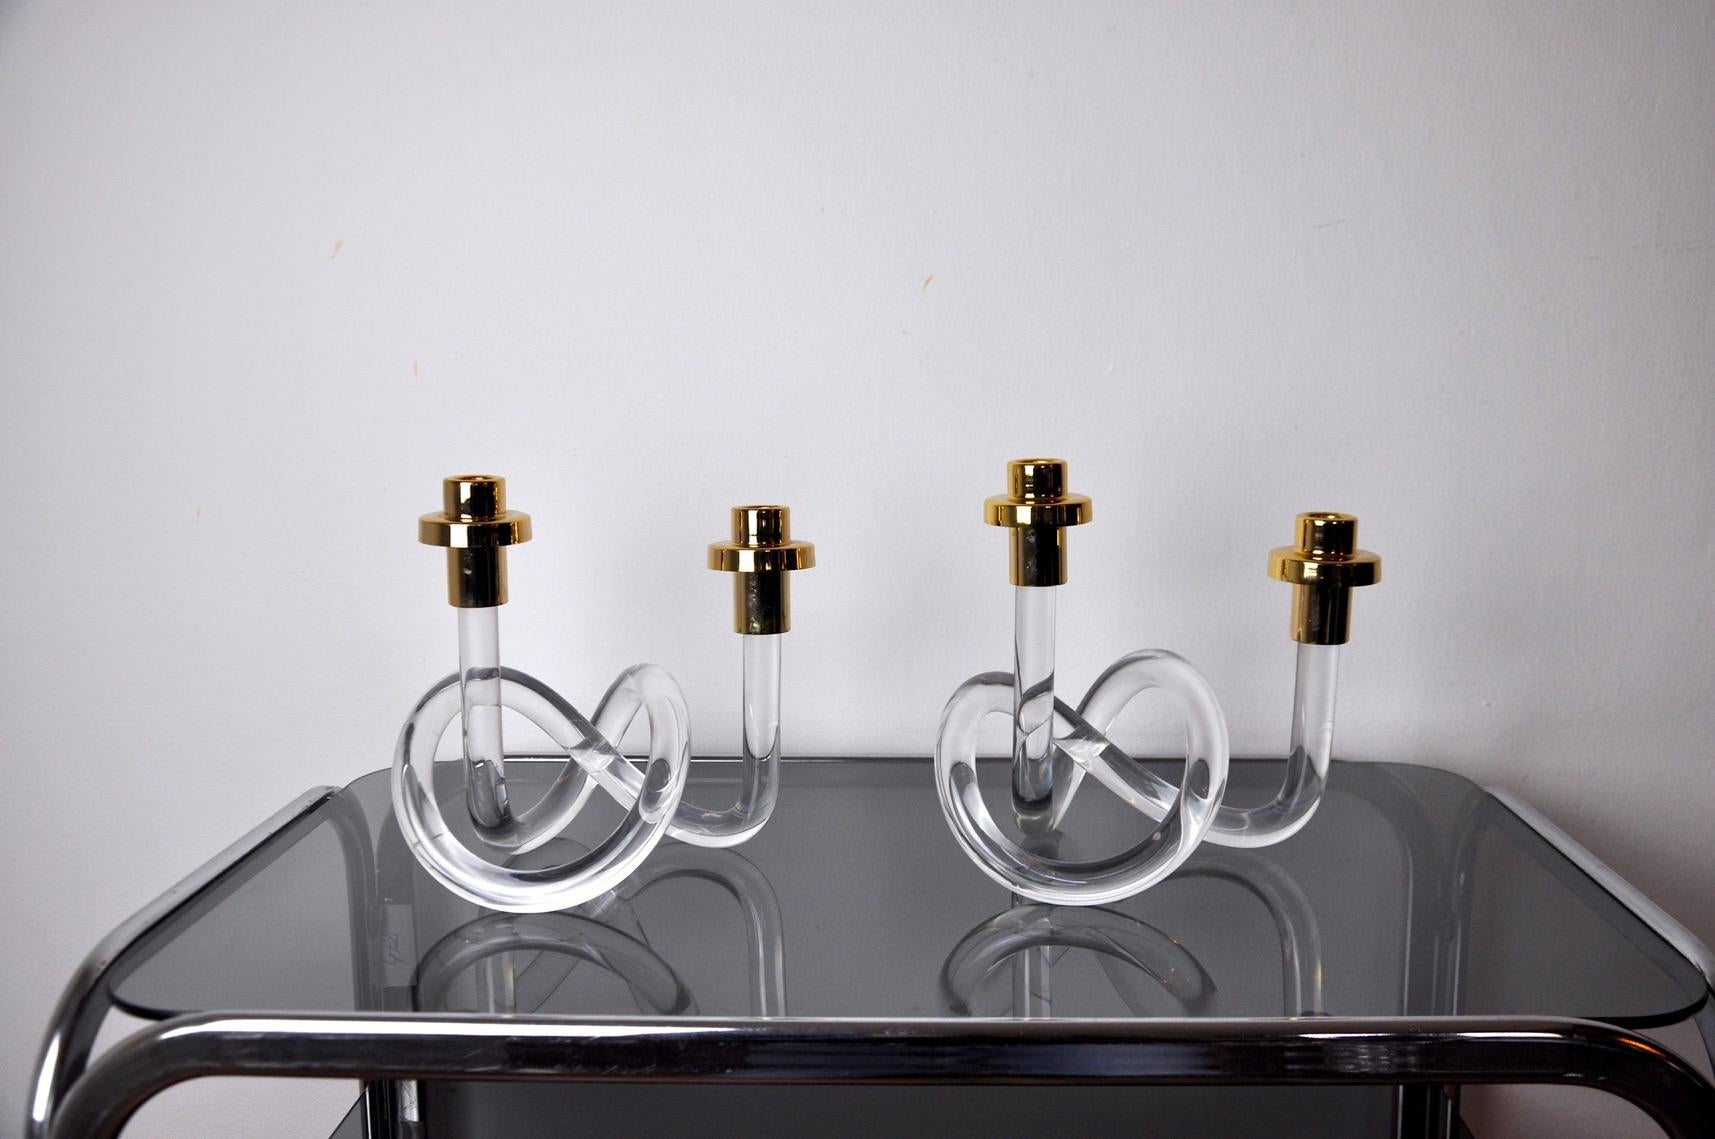 Pair of Lucite Dorothy Thorpe Candle Holders designed and produced in the 1970's. Pretzel shaped gold colored brass holder designed by Elaine Bscheider. Superb design and vintage object to decorate your interior. 

 